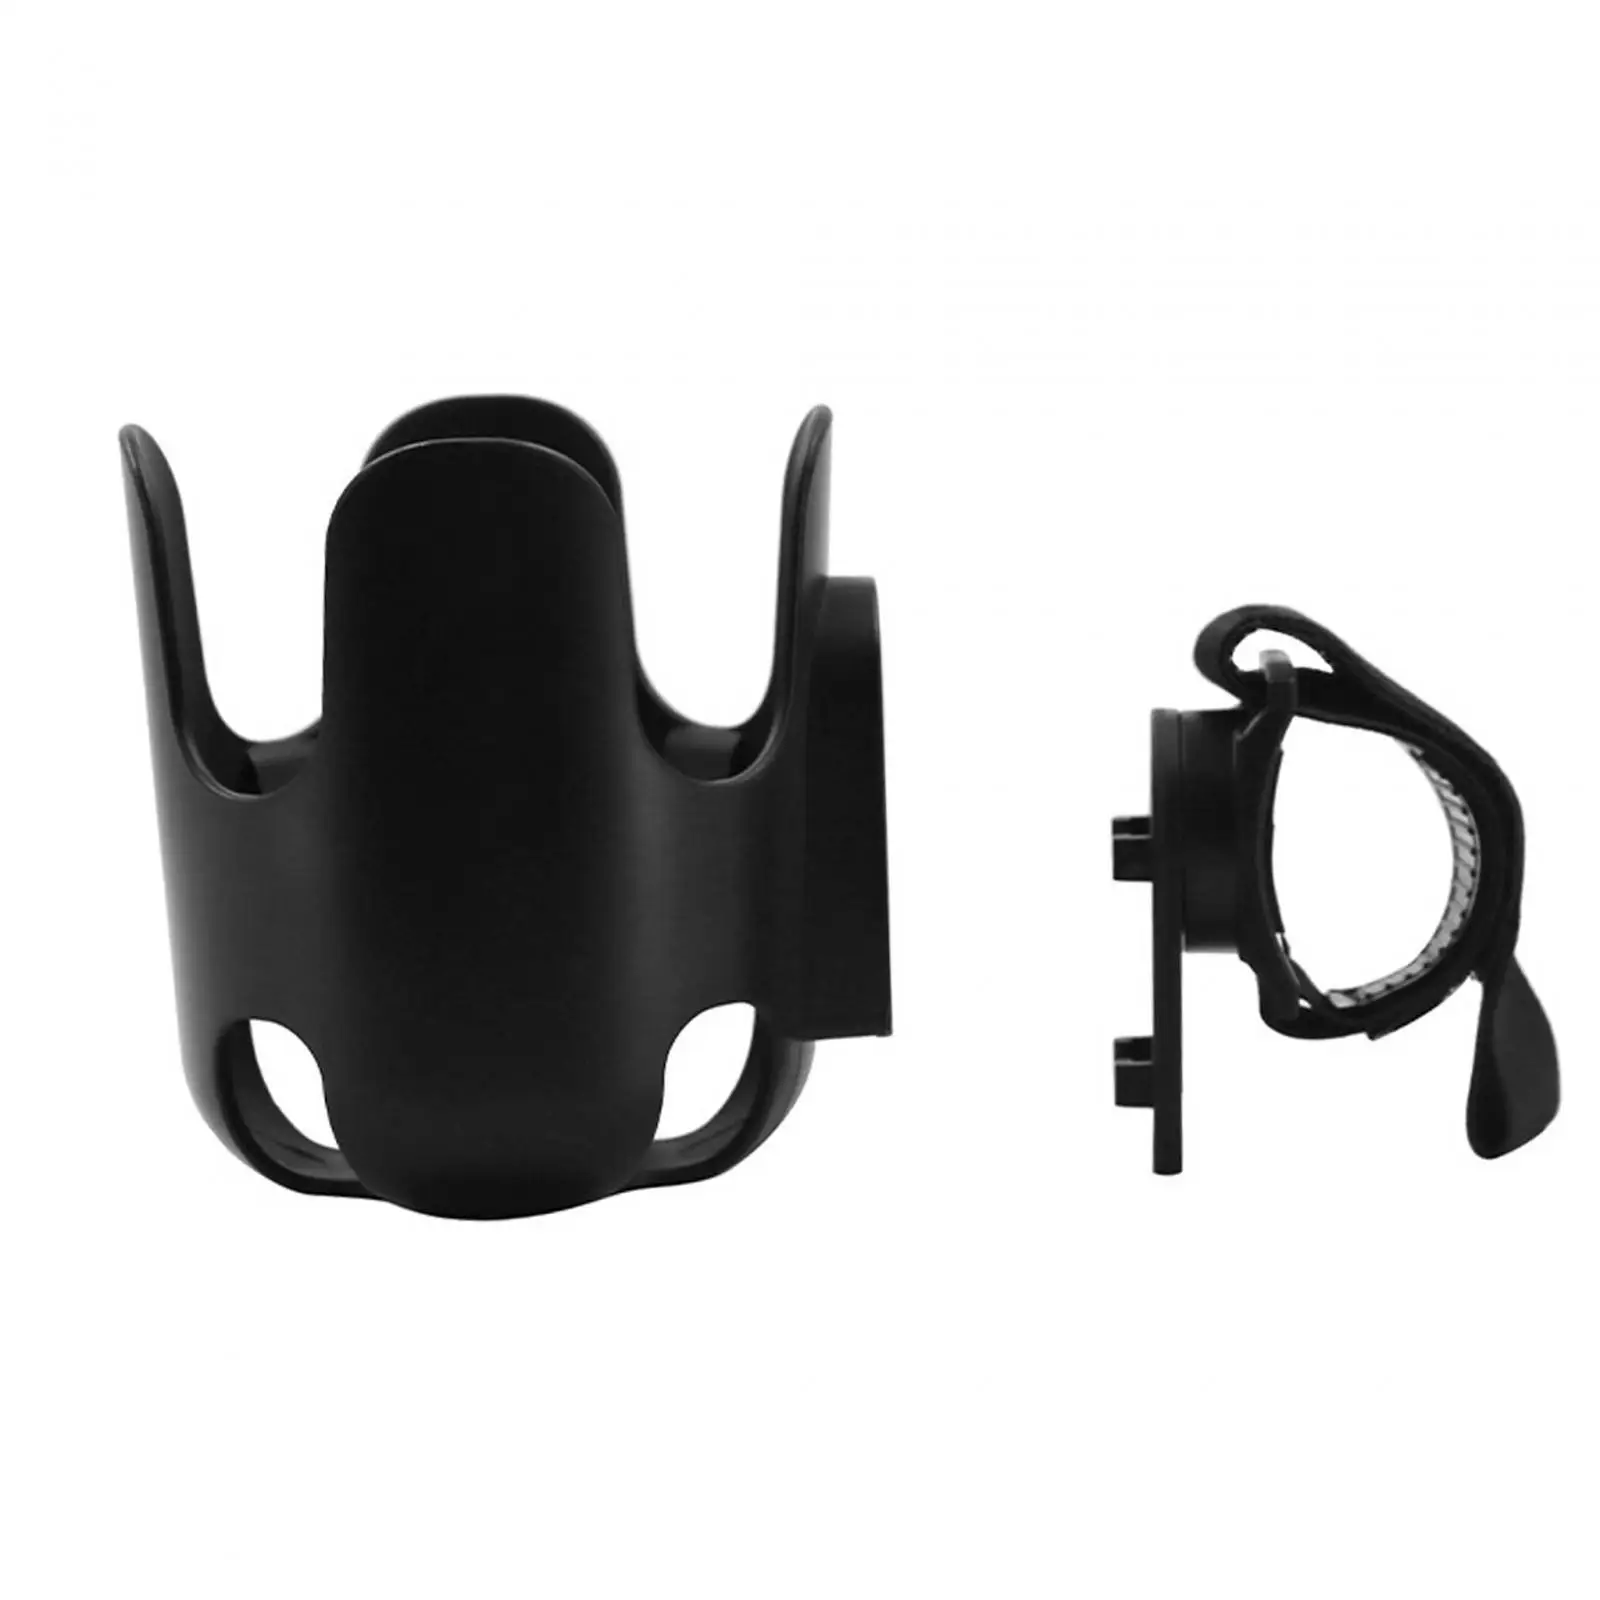 Stroller Cup Holder Fits Most Cups Stable Bike Cup Holder Drinks Bottle Stand Universal Drink Holder for Pushchair Pram Tricycle